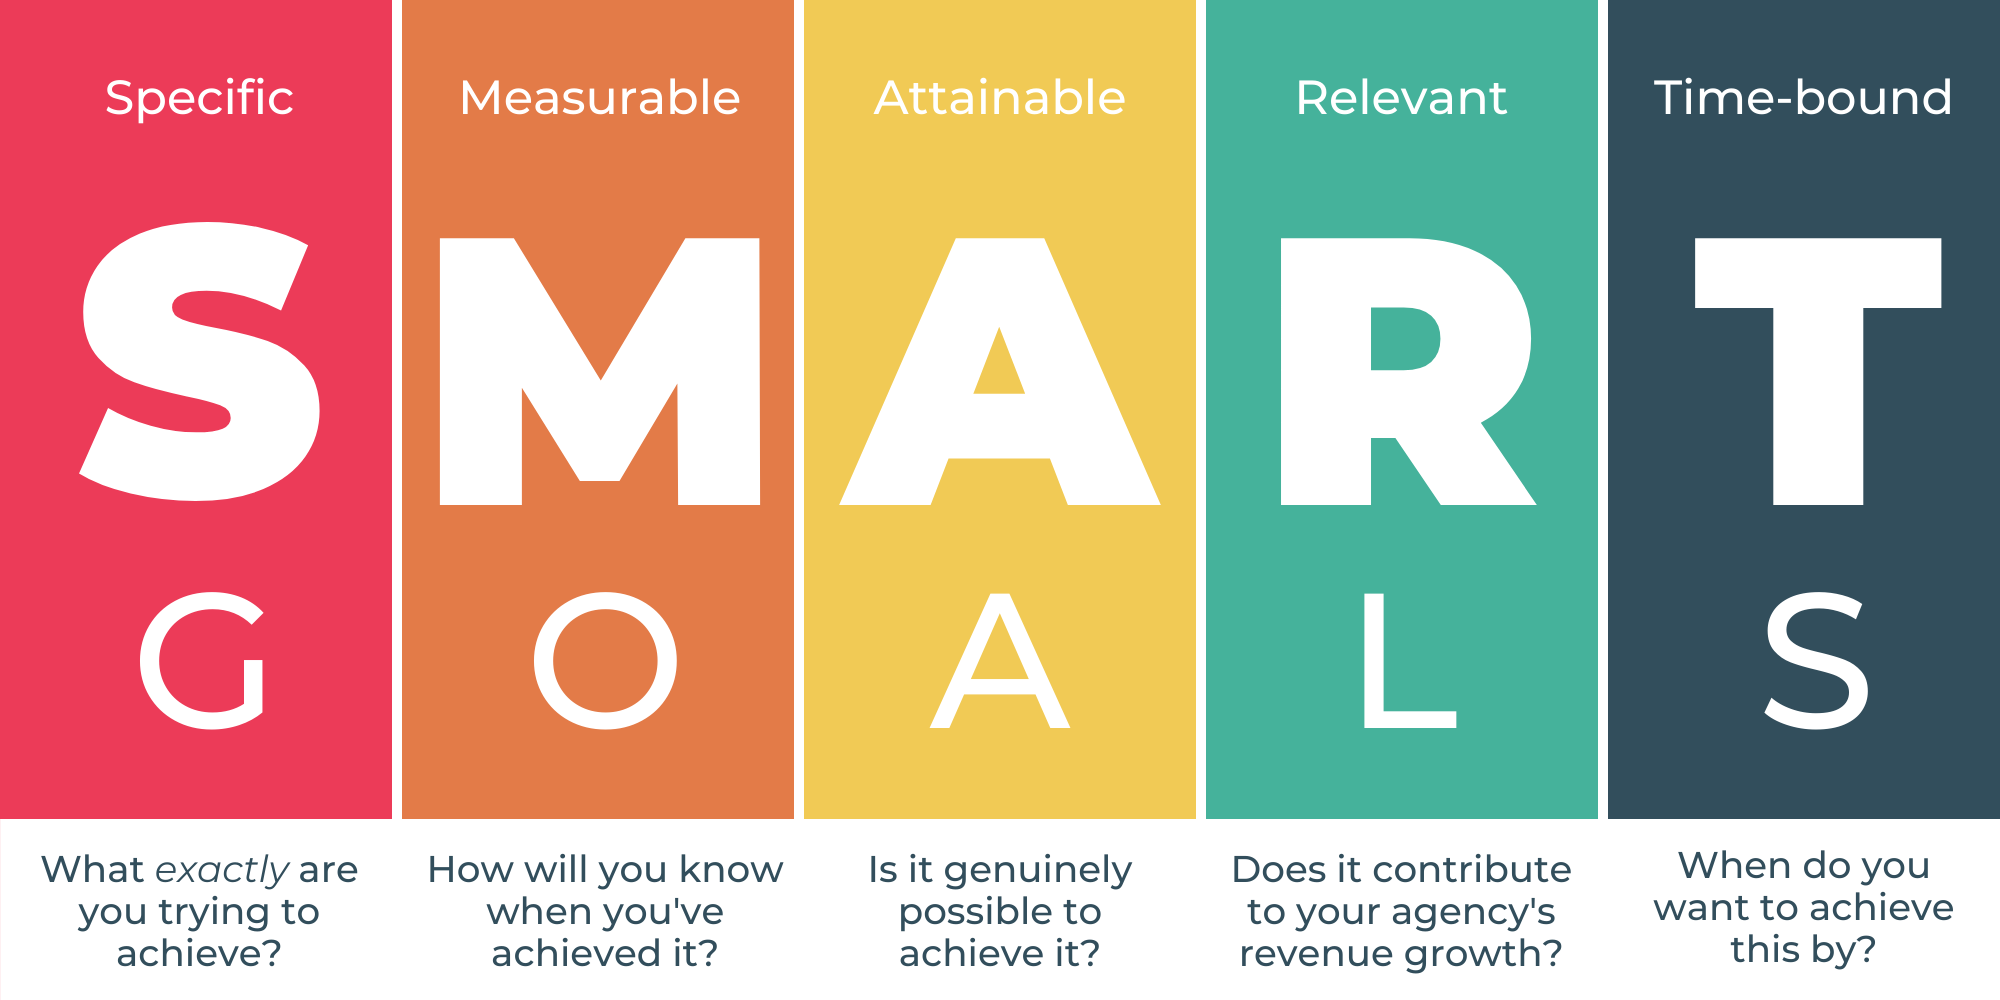  The image shows the acronym 'SMART' with each letter representing a characteristic of effective sales and marketing goals and objectives.